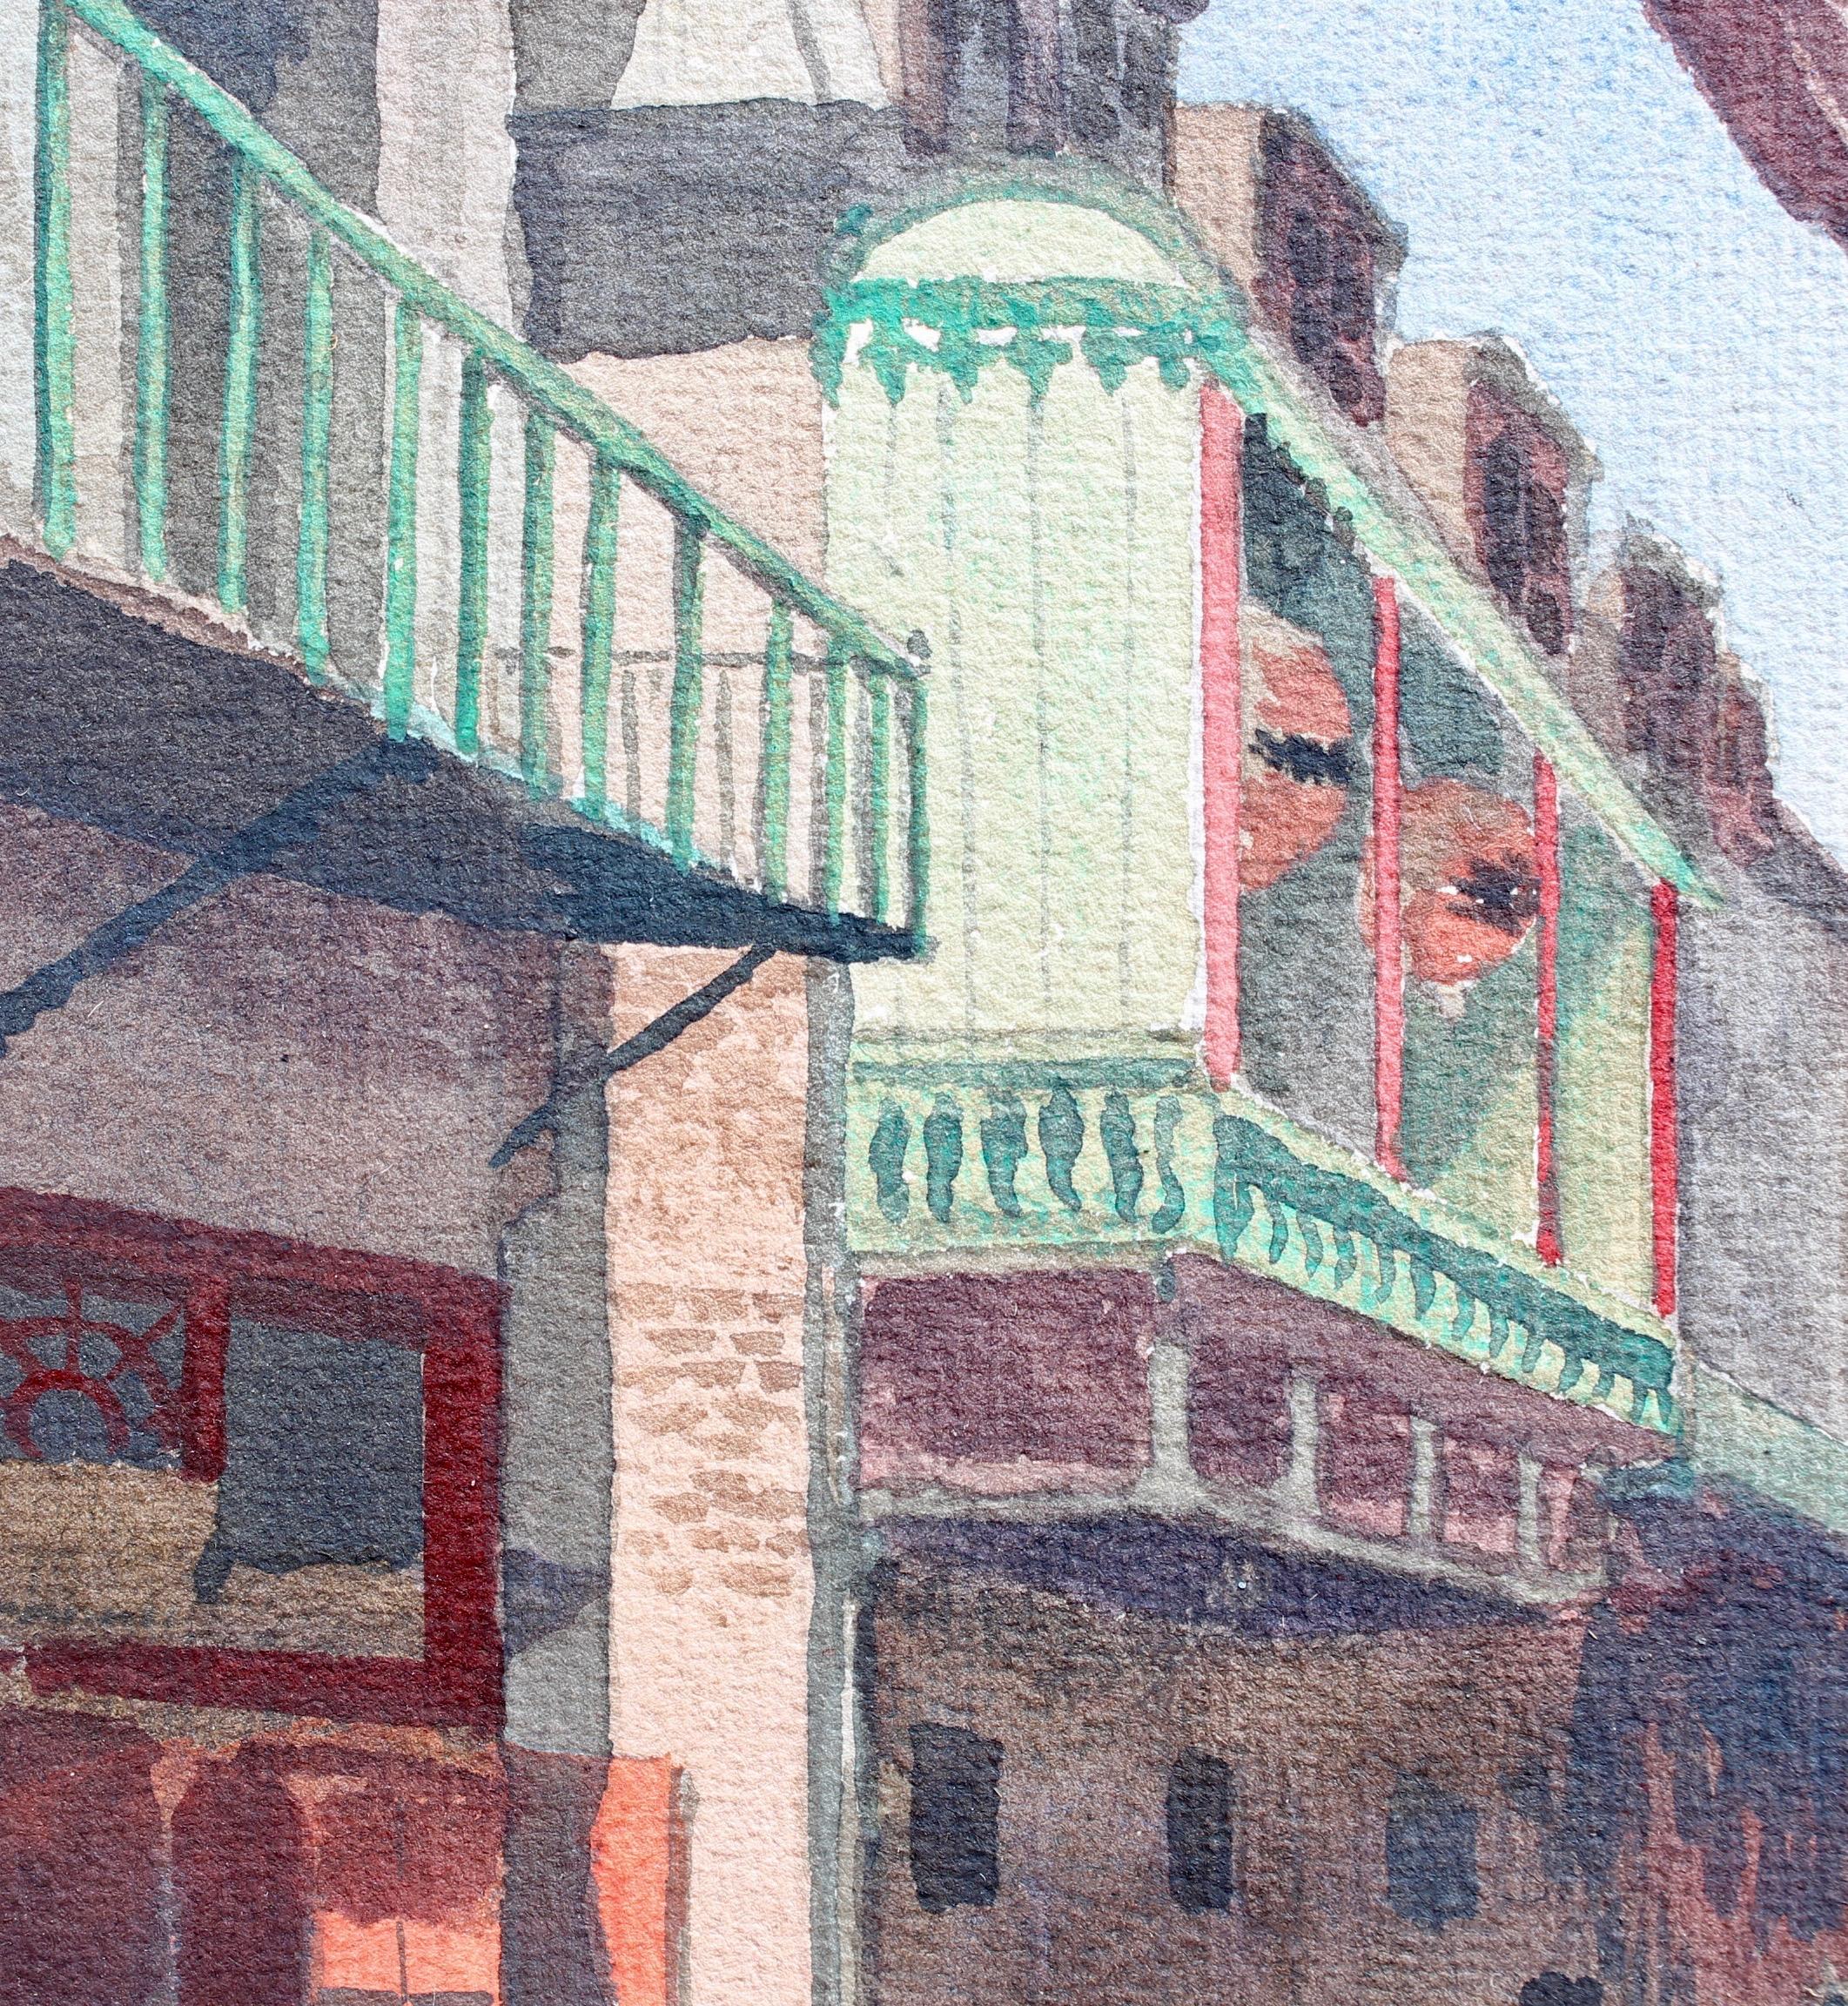 'Chinatown, San Francisco', gouache on fine art paper, by Edward Wilson Currier (1903). Spofford Alley in San Francisco's Chinatown is best known for an address (number 36) where Dr. Sun Yat-Sen plotted the overthrow of China's last dynasty. During